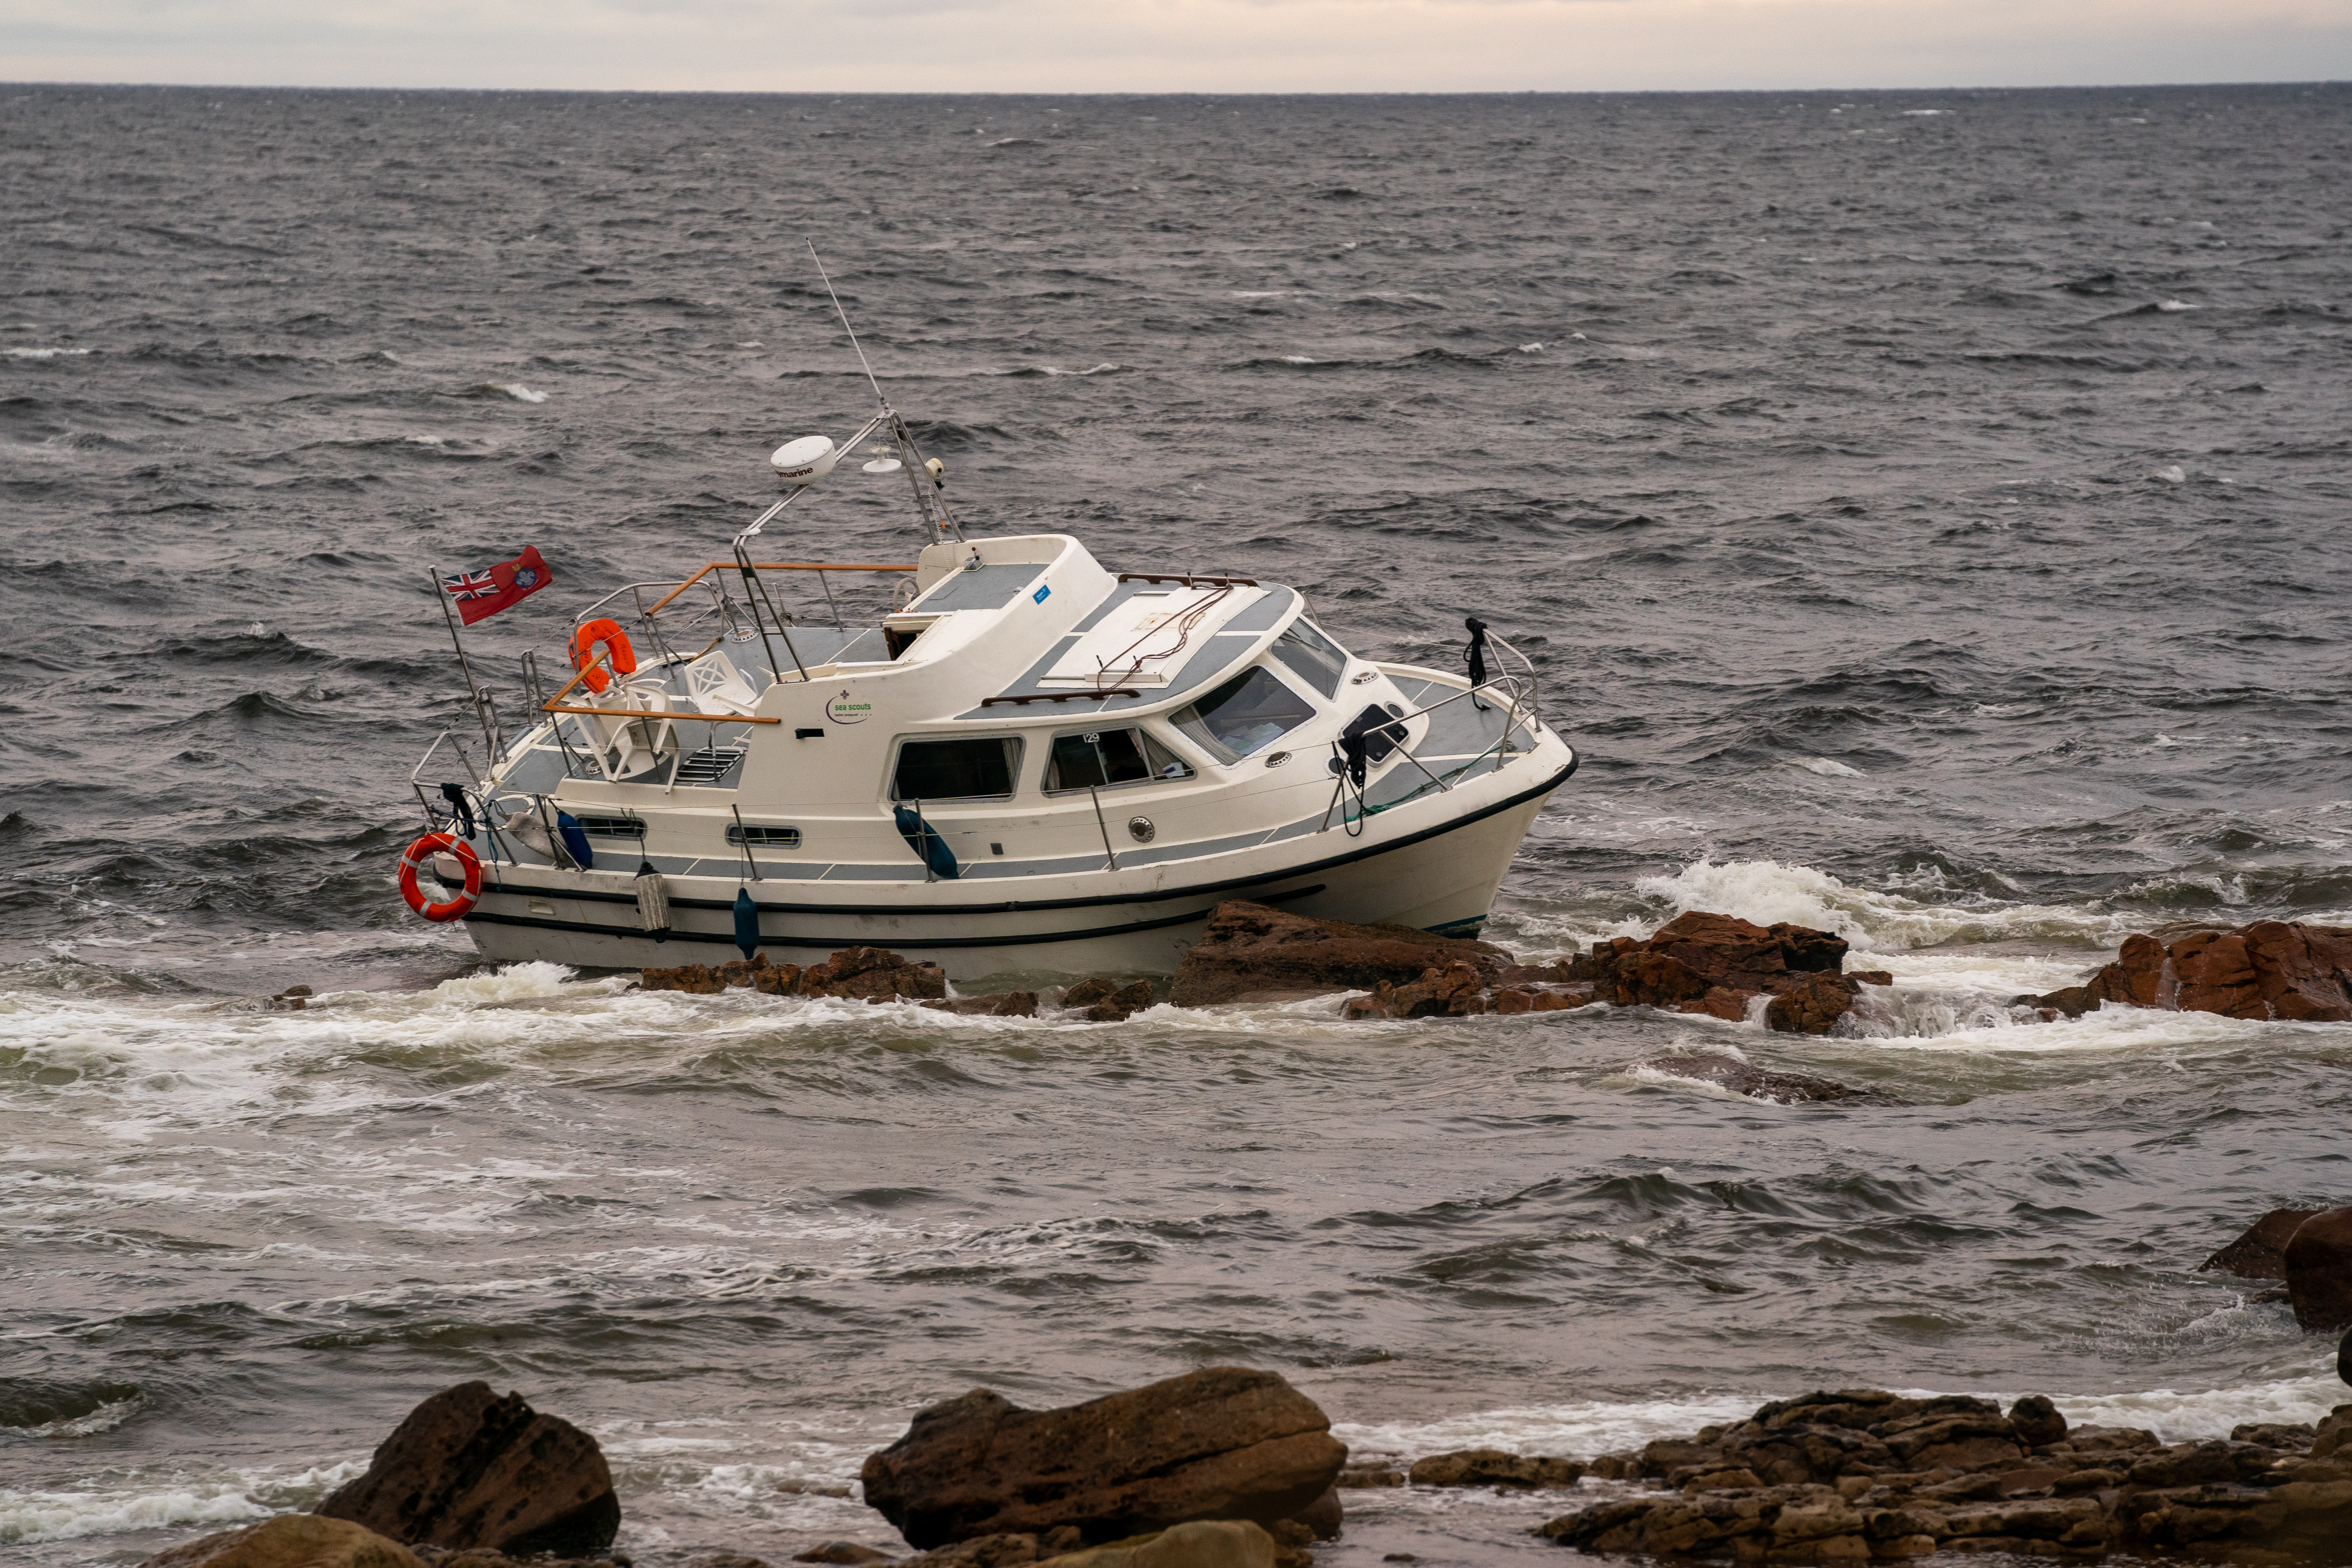 The ran aground vessel at Burghead.